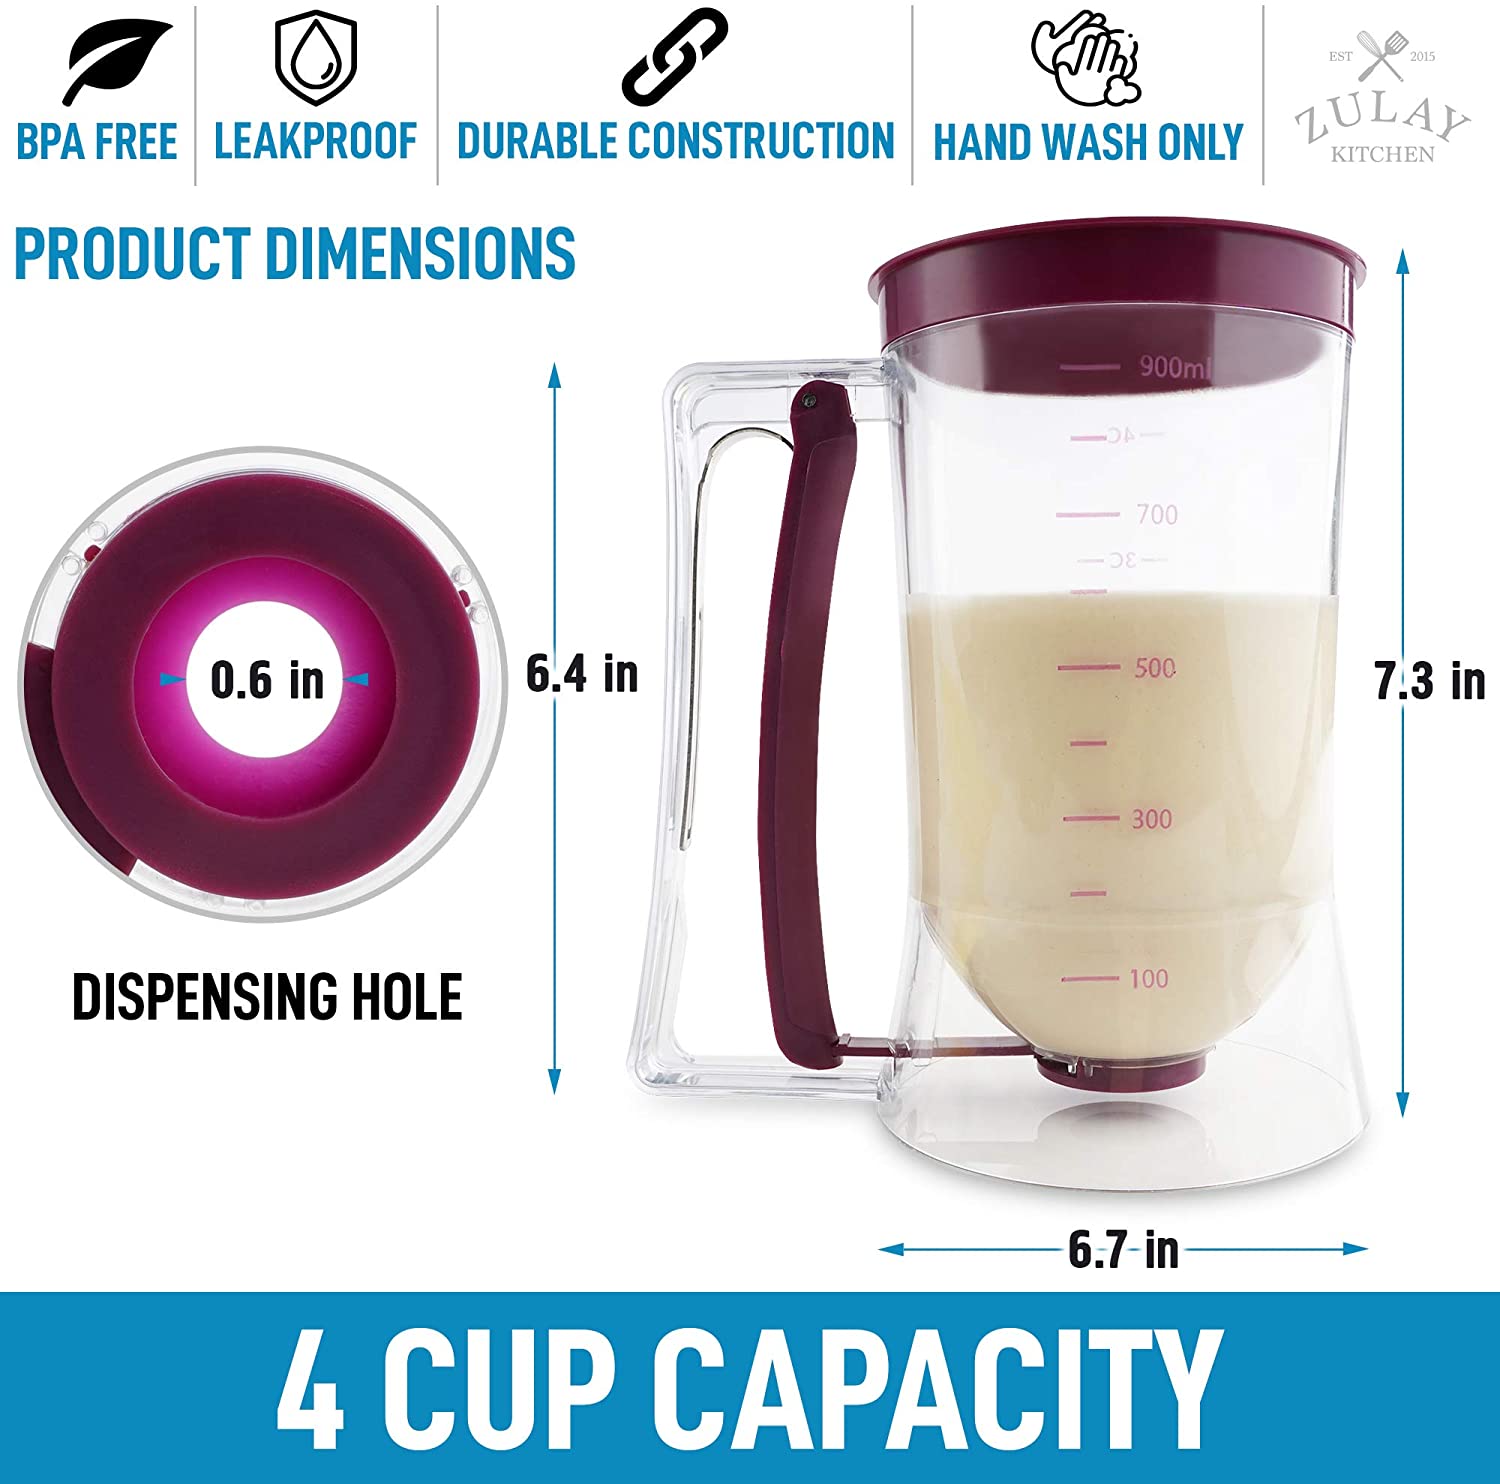  Dalup Enterprises Pancake Batter Dispenser - Kid Friendly &  Mess Free Cupcake Batter Dispenser with Squeeze Handle for Precise Portion  Control, Also Perfect for Waffles, Crepes, Cakes (4 Cup Capacity) 